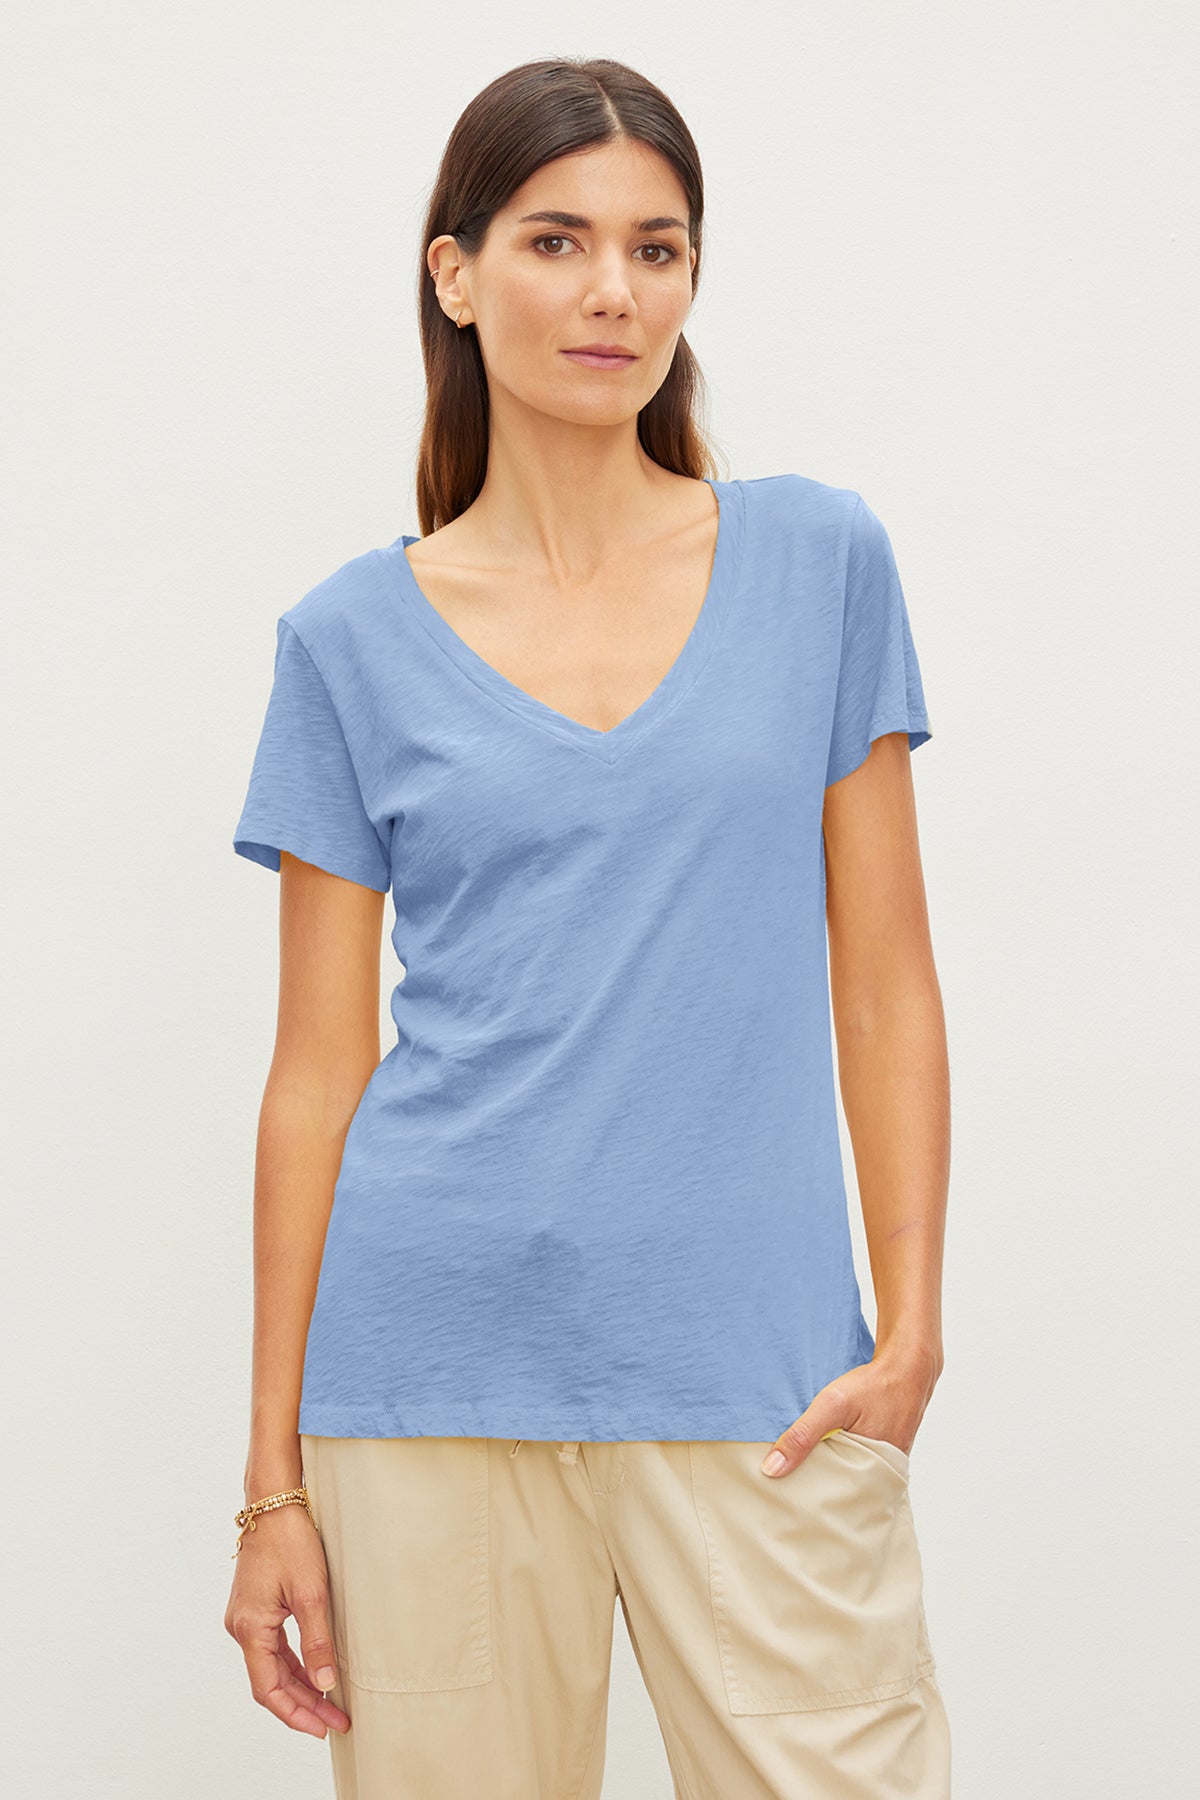 A woman with a tomboy style wearing a blue LILITH COTTON SLUB V-NECK TEE by Velvet by Graham & Spencer.-35967728943297